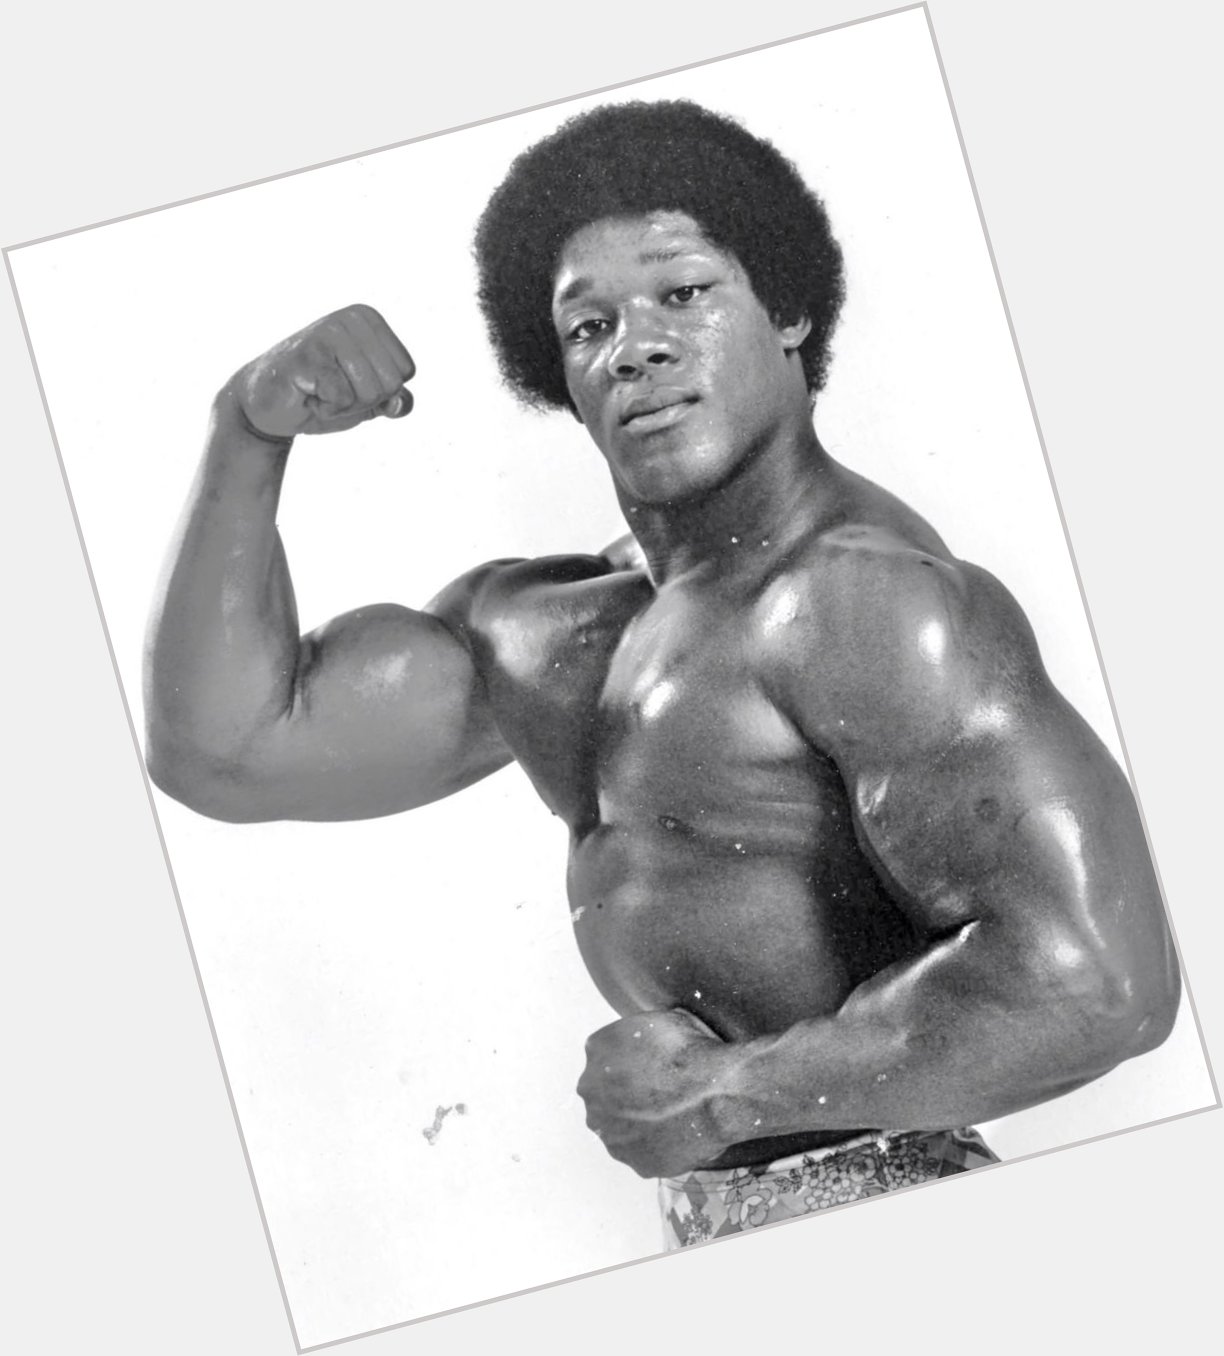 And a happy birthday to Tony Atlas - the 3-time Mr USA bodybuilding champion and wrestling powerhouse is 68 today 